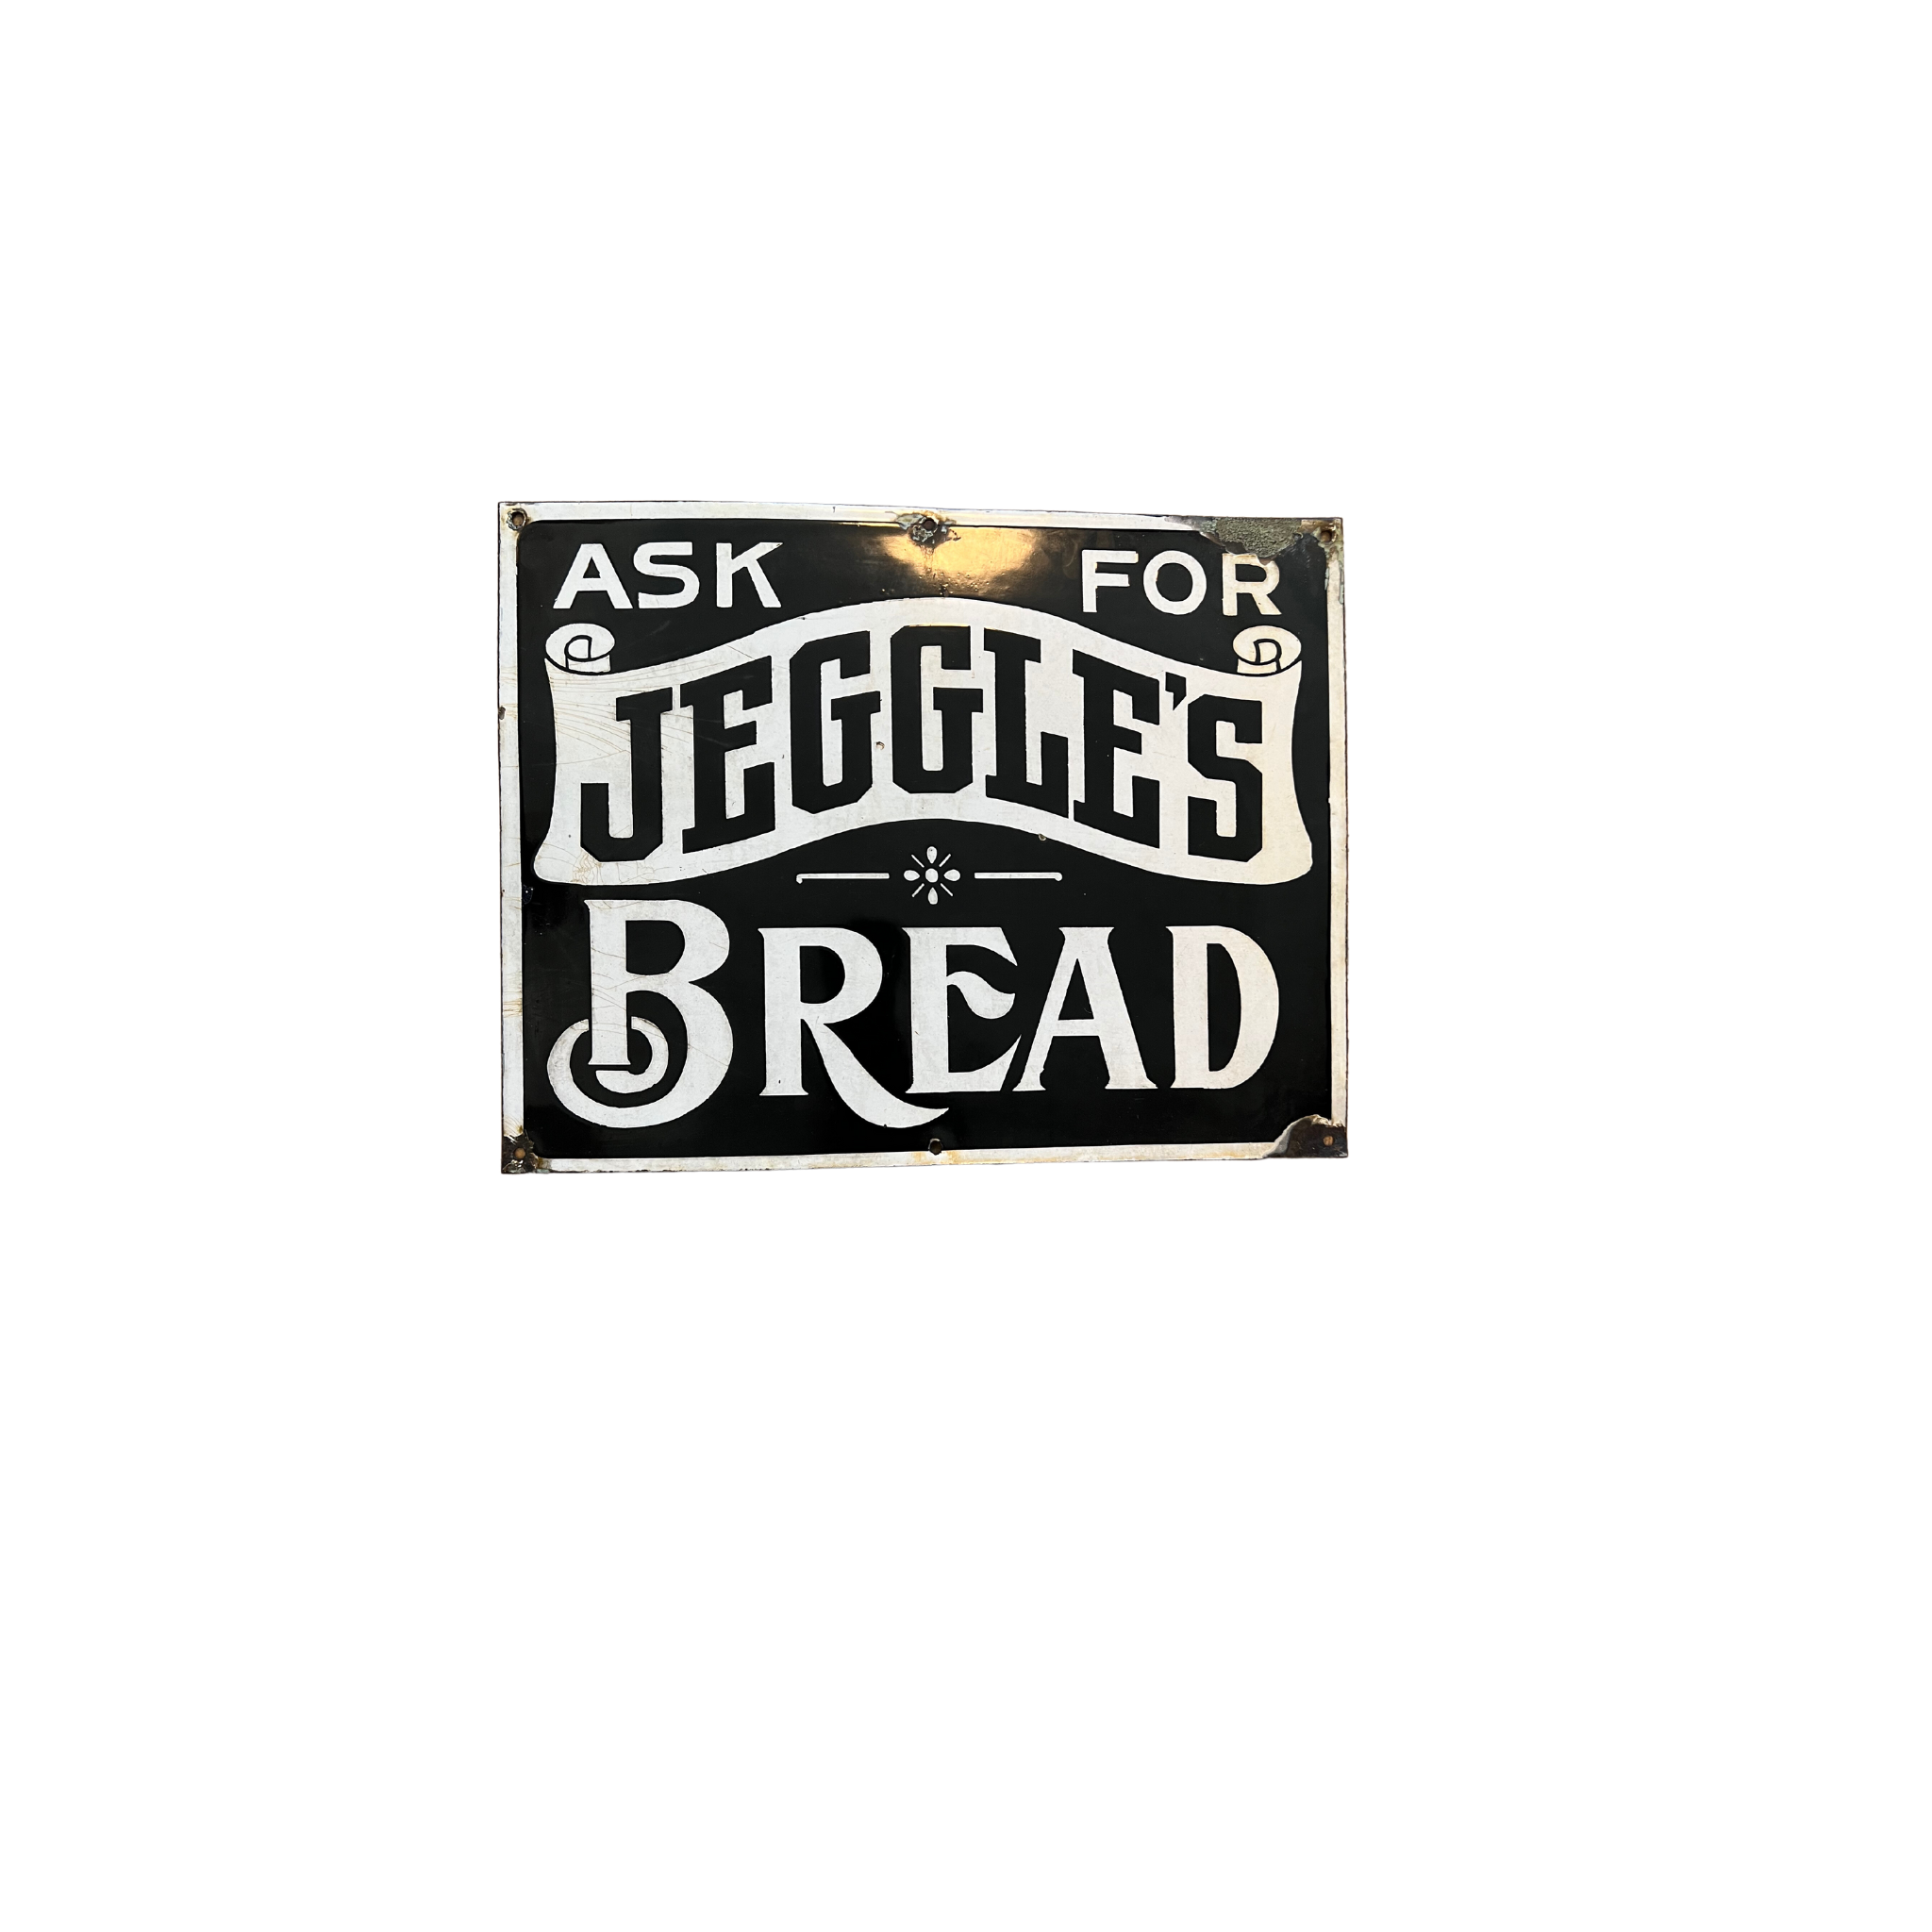 Jeggle's Bread Sign